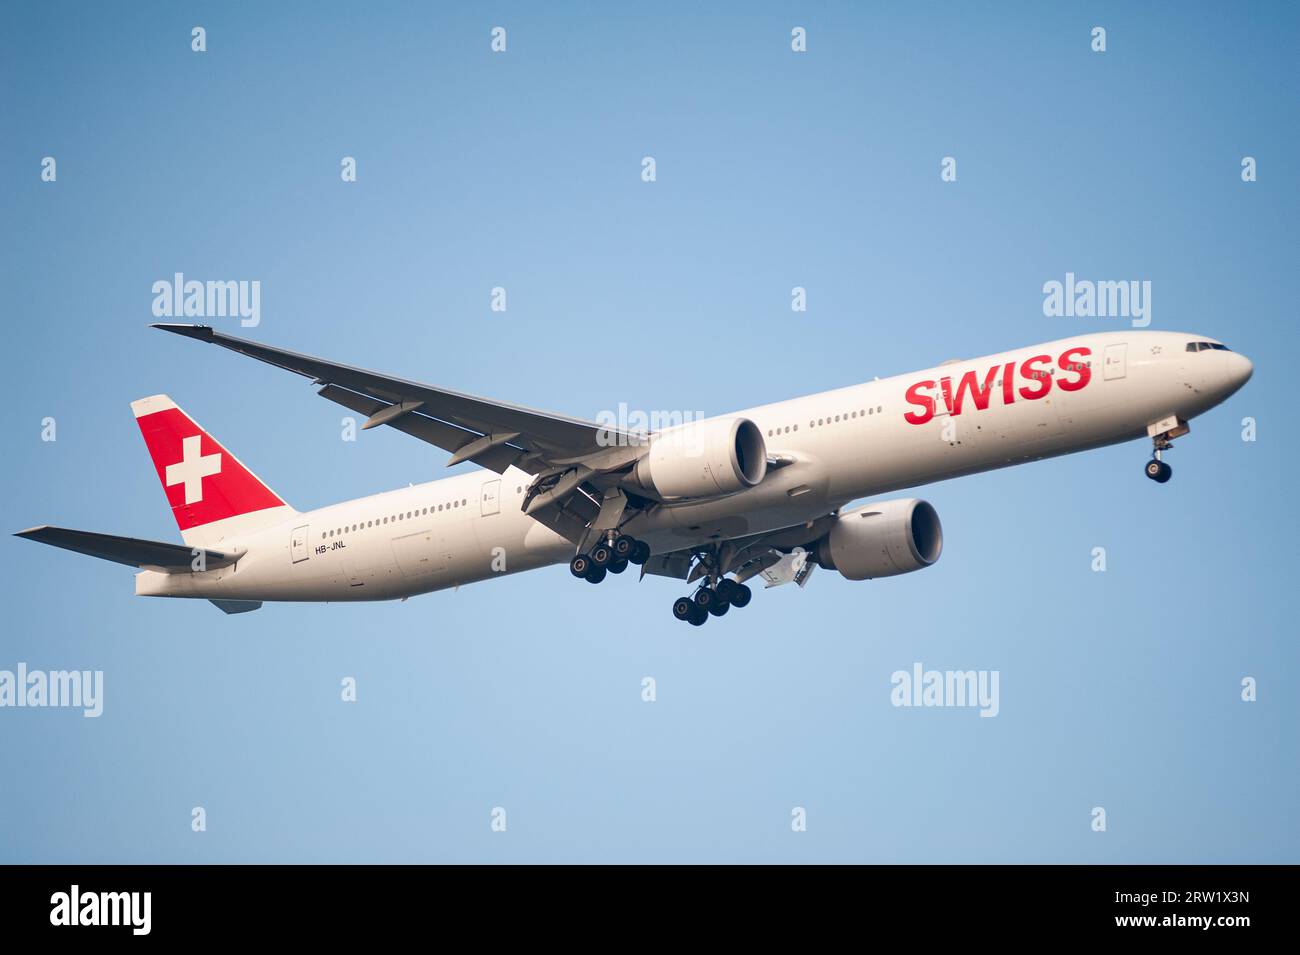 26.07.2023, Republic of Singapore, Singapore, Singapore - A Swiss Airlines passenger aircraft of type Boeing 777-300ER with registration HB-JNL on app Stock Photo